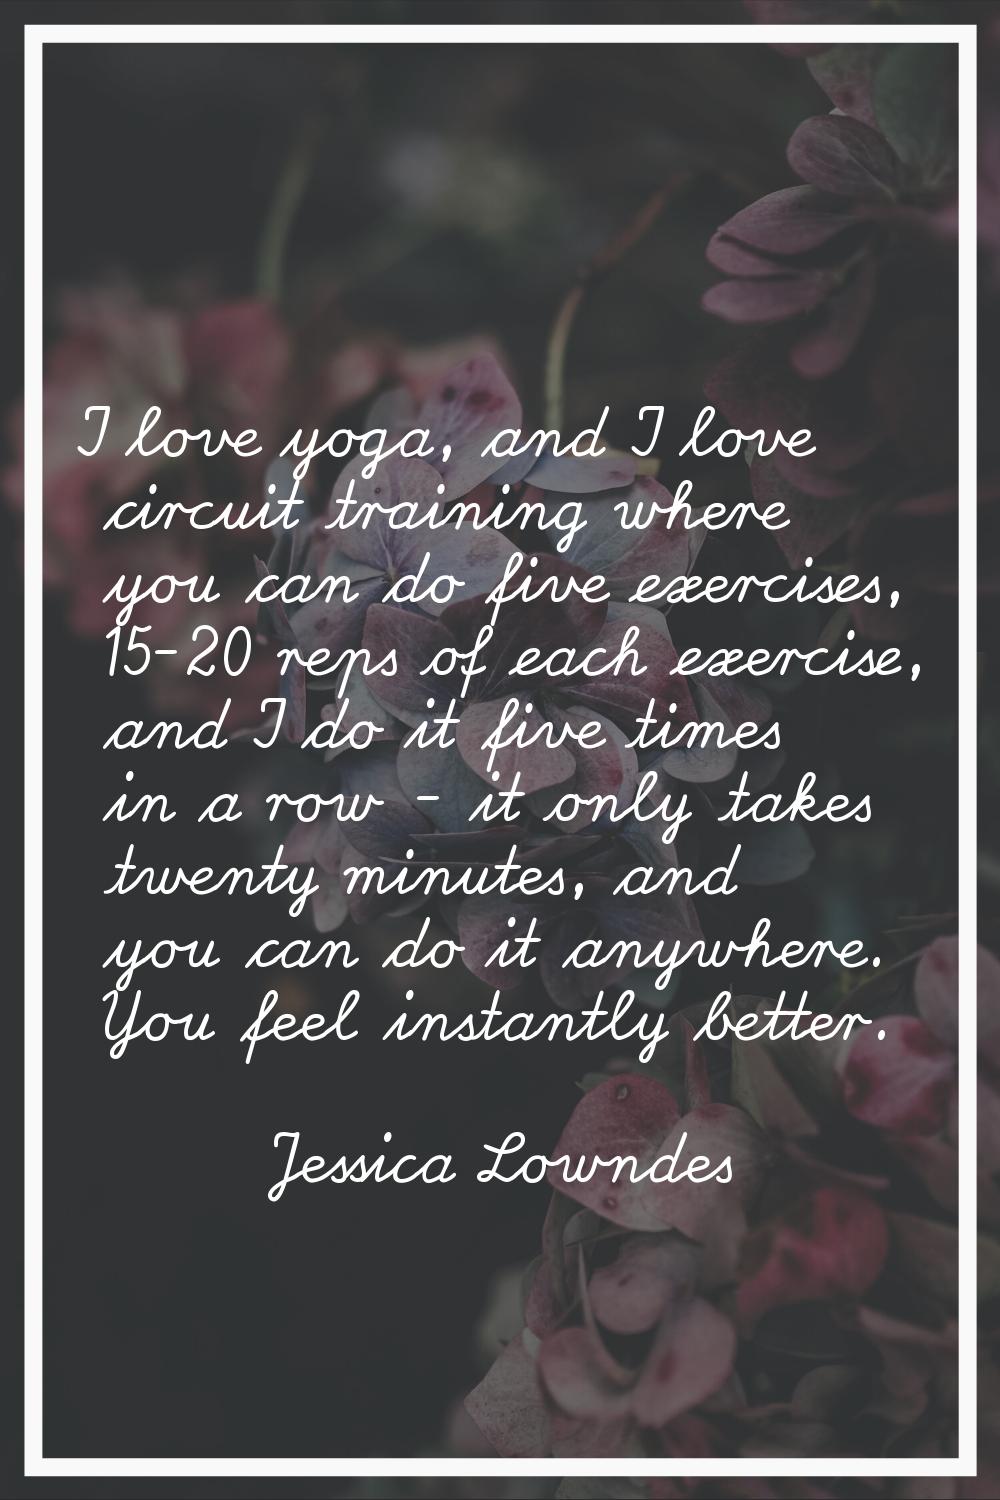 I love yoga, and I love circuit training where you can do five exercises, 15-20 reps of each exerci